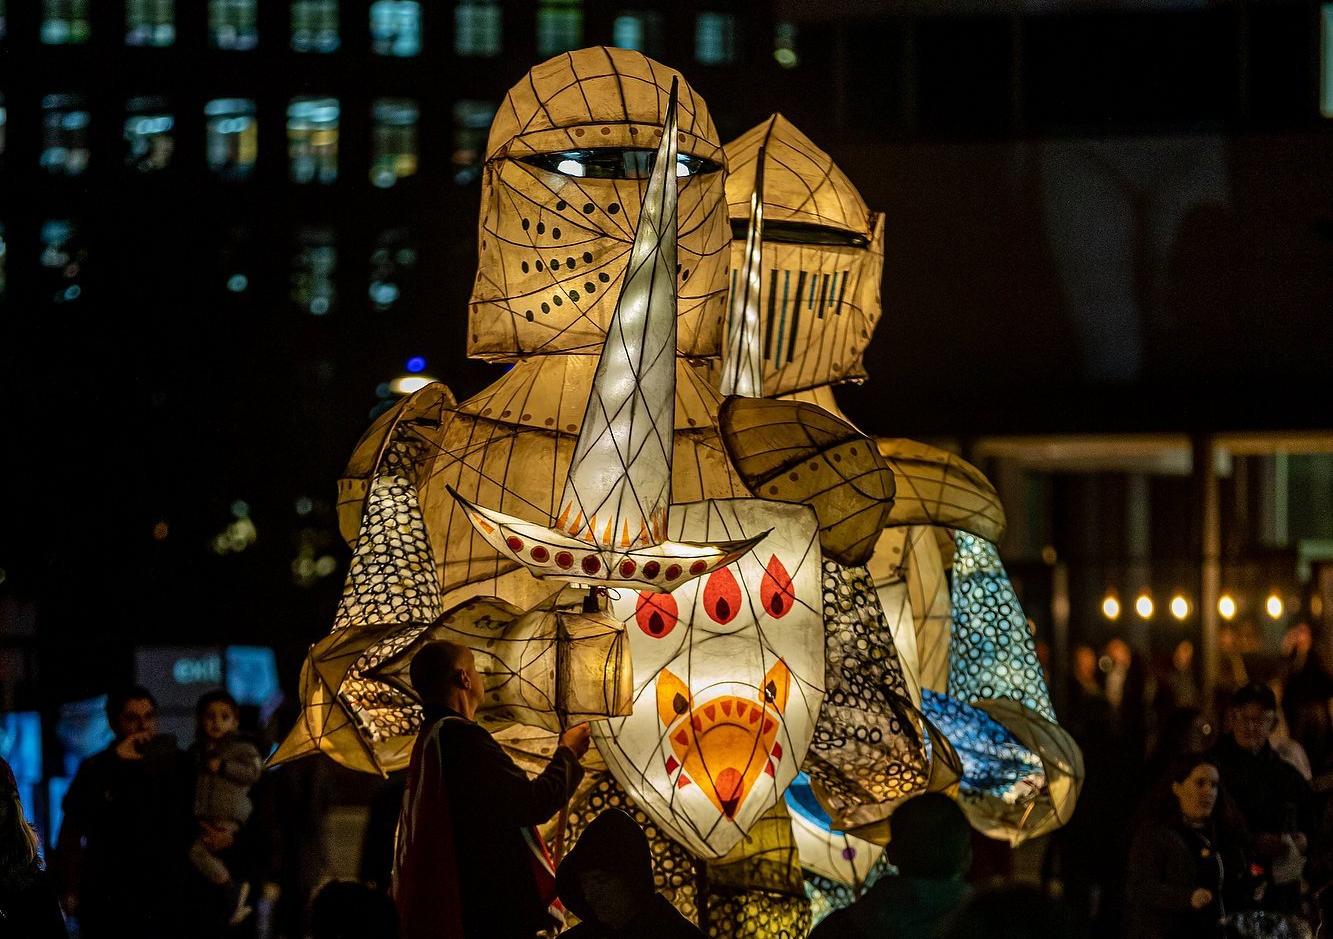 Handmade parade Light Knights battle outside the Royal Armouries as part of Light Night Leeds 2019.